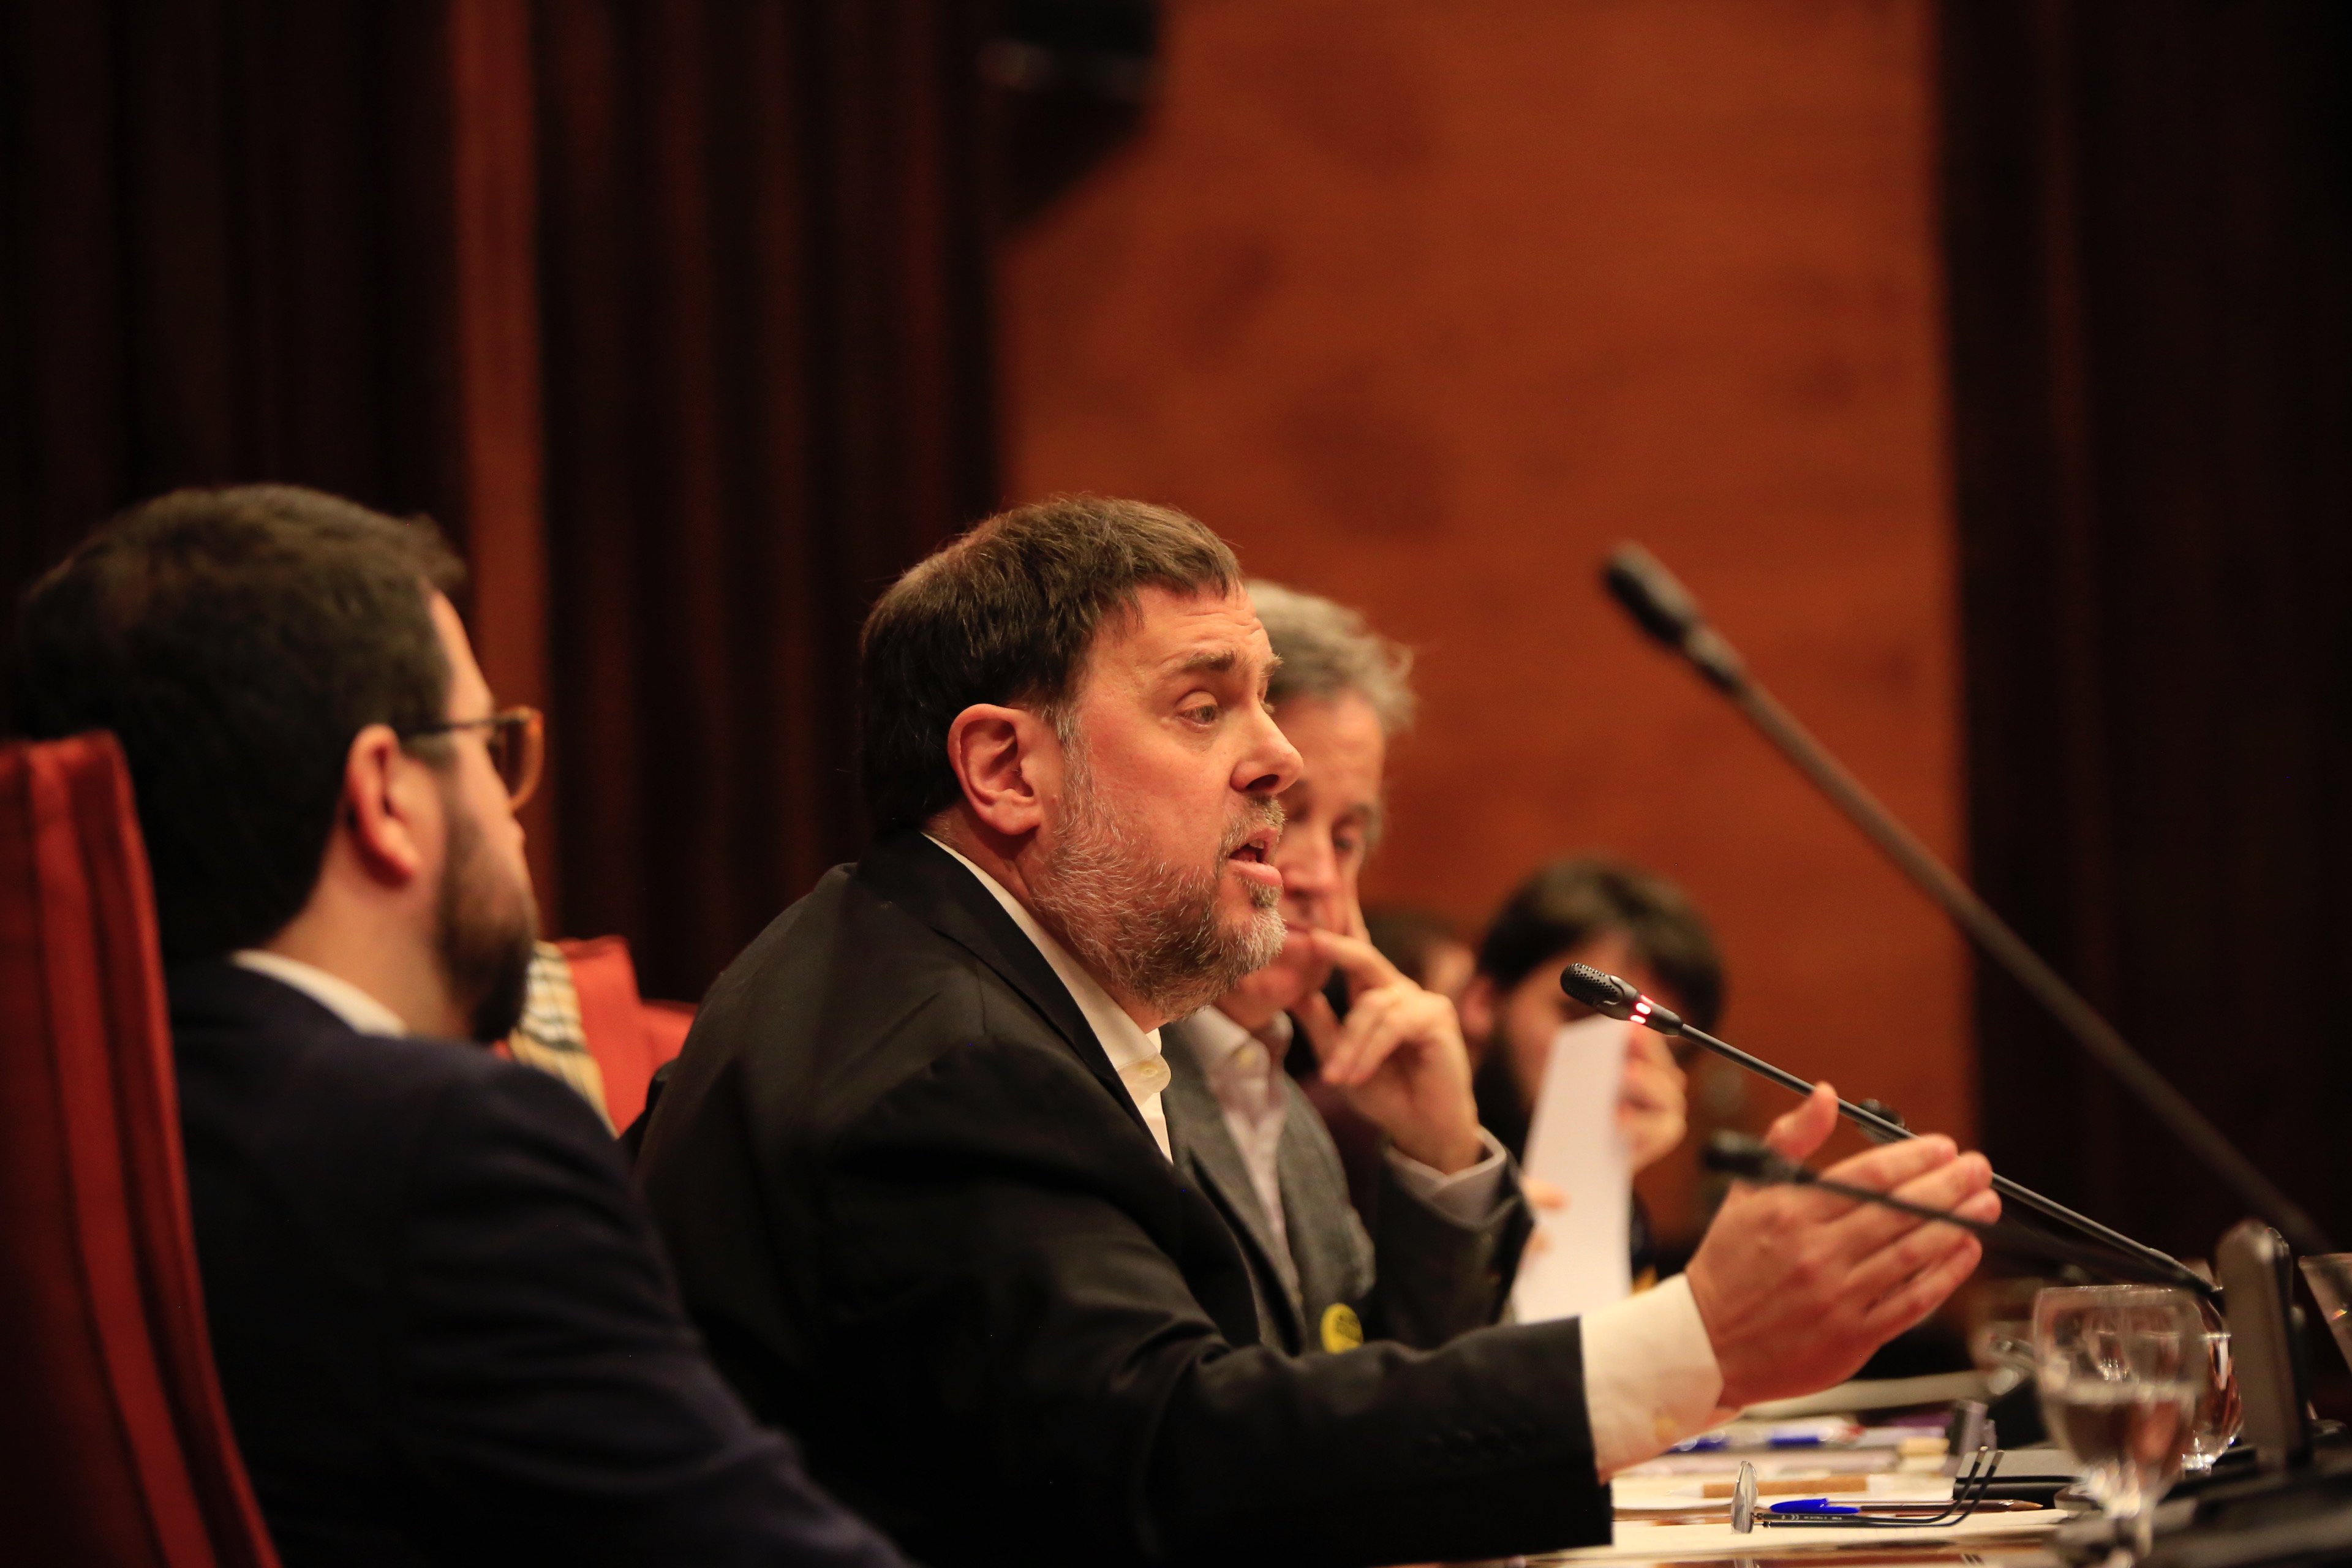 Junqueras: "I expect that the ERC candidate in the Catalan election will be me"